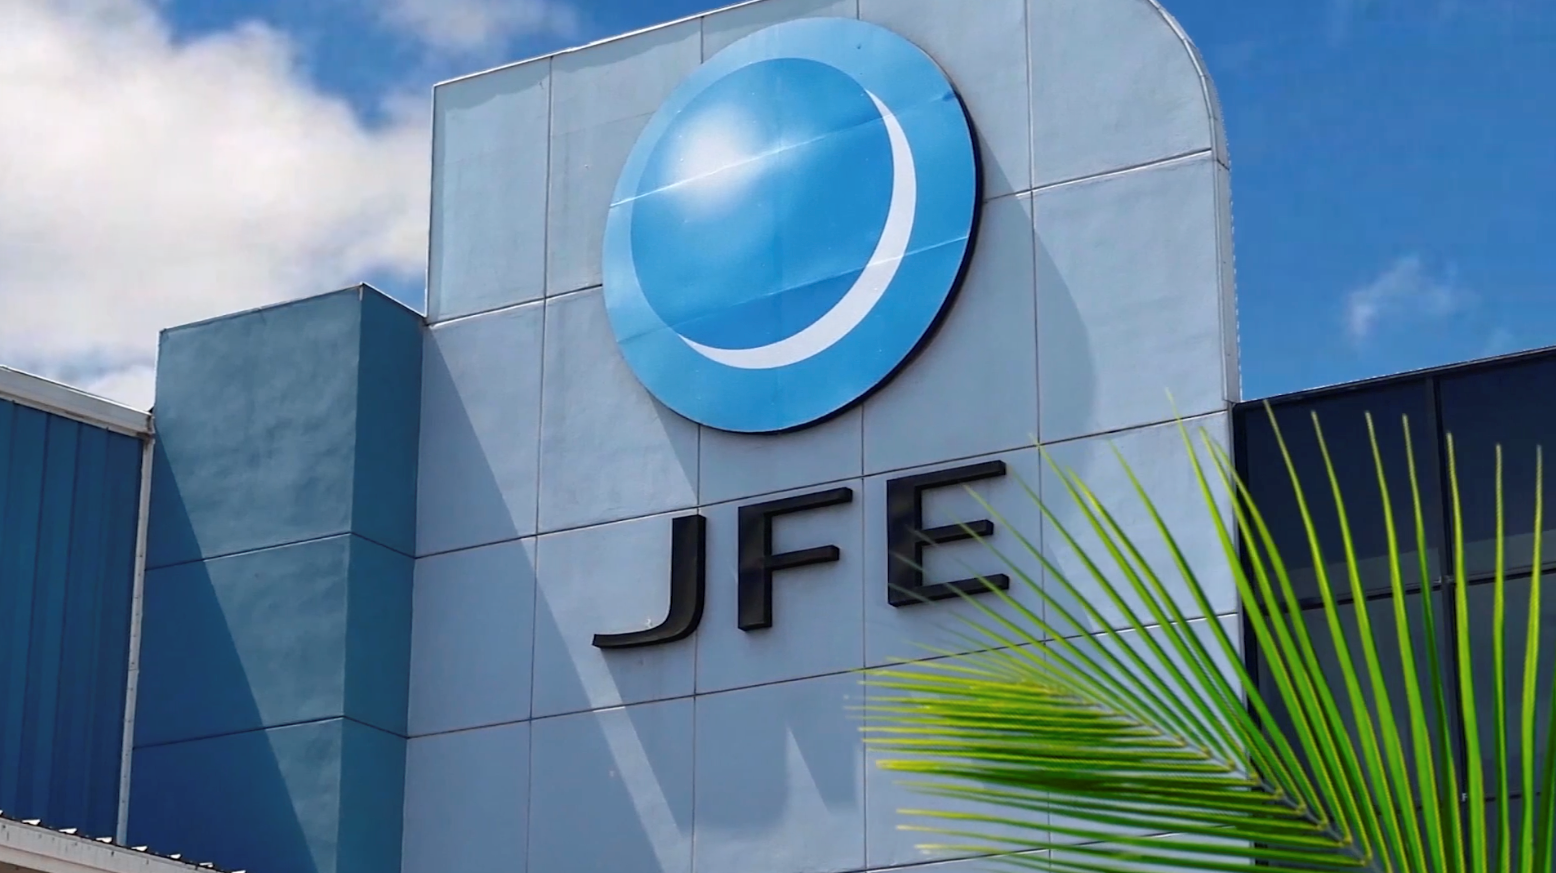 JFE Steel achieves ecoLeaf certification for sustainable steel products